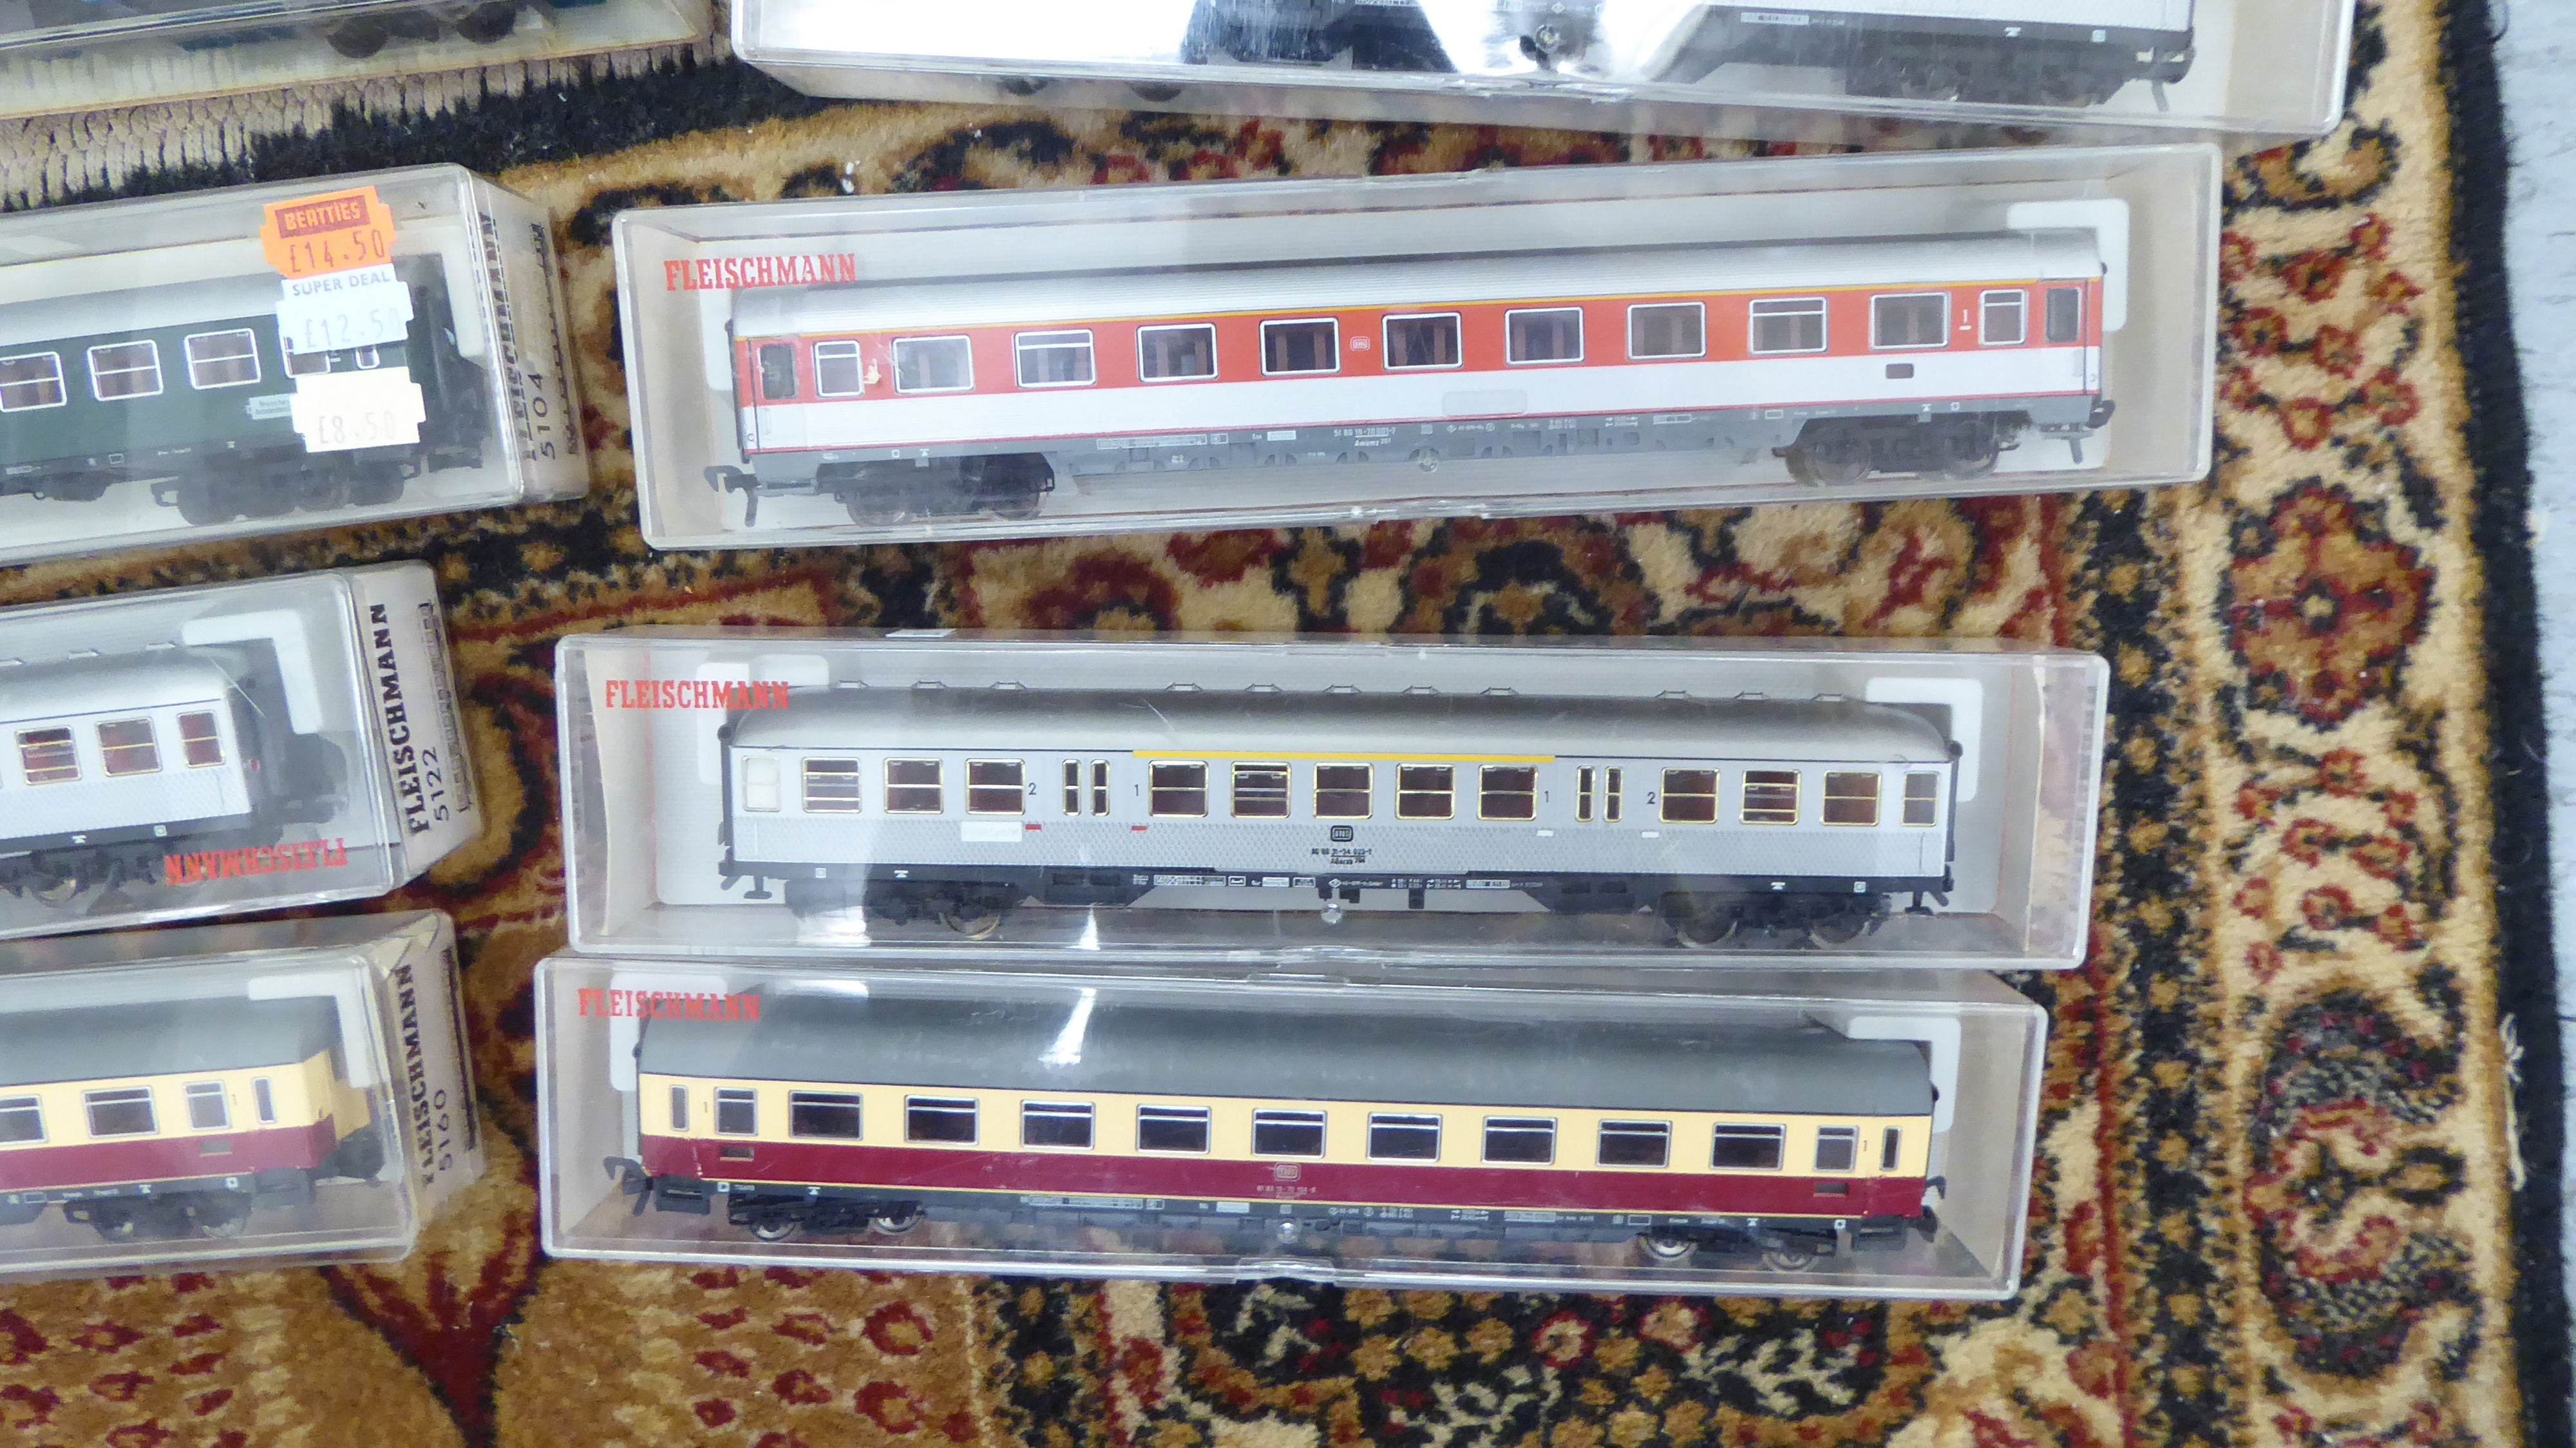 Fleischmann HO gauge model railway accessories: to include an Intercity Express and various coaches - Image 7 of 8